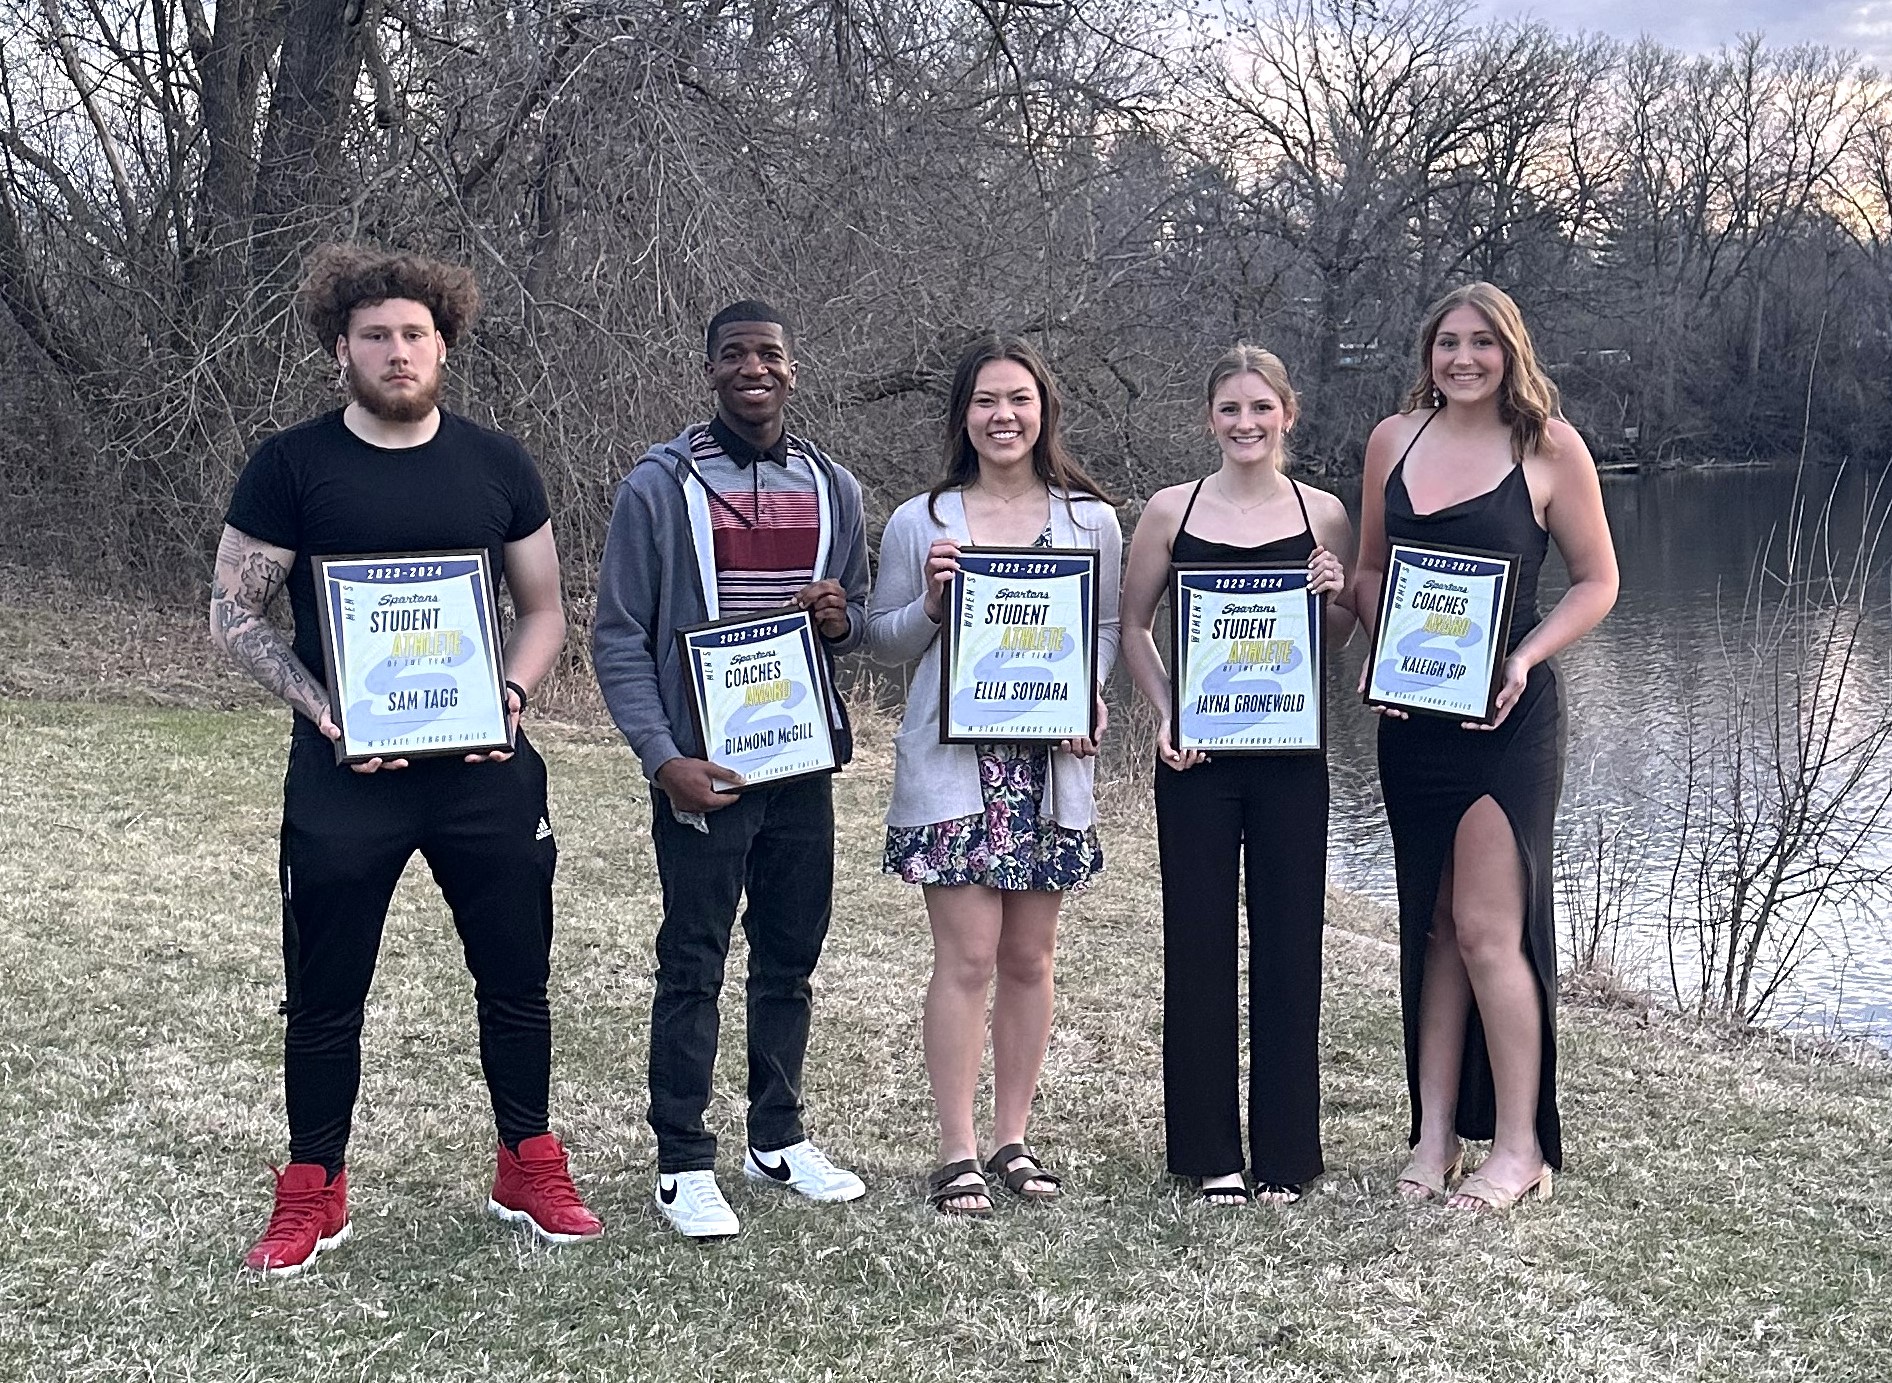 This year’s M State Spartan athletic award winners included, left to 첥: Sam Tagg, Male Student Athlete of the Year; Diamond McGill, Male Coaches Award winner; Ellia Soydara, Female Student Athlete of the Year; Jayna Gronewold, Female Student Athlete of the Year; and Kaleigh Sip, Female Coaches Award winner.